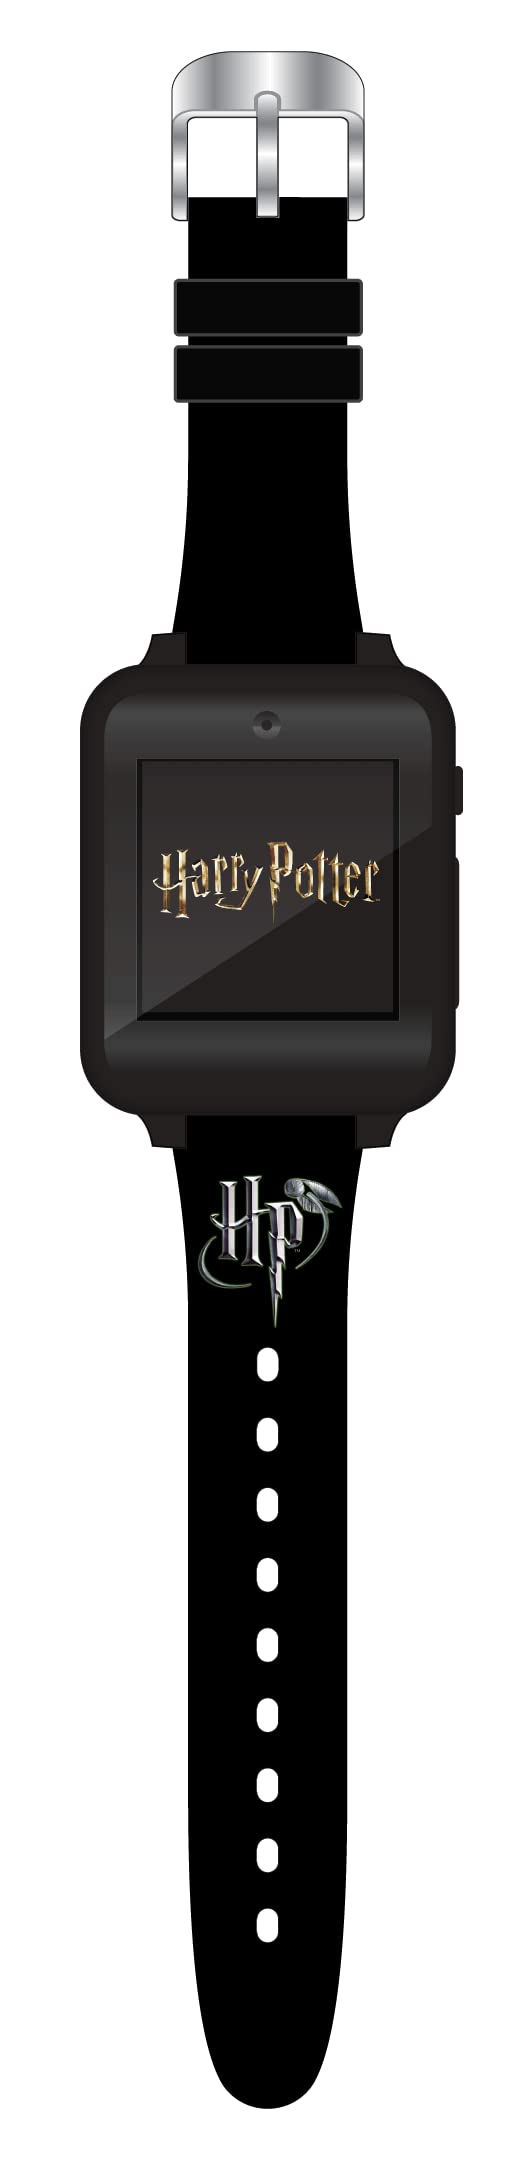 Accutime Kids Harry Potter Educational Learning Touchscreen Black Smart Watch Toy with Black Strap for Girls, Boys, Toddlers - Selfie Cam, Games, Alarm, Calculator, Pedometer (Model: HP4096AZ)